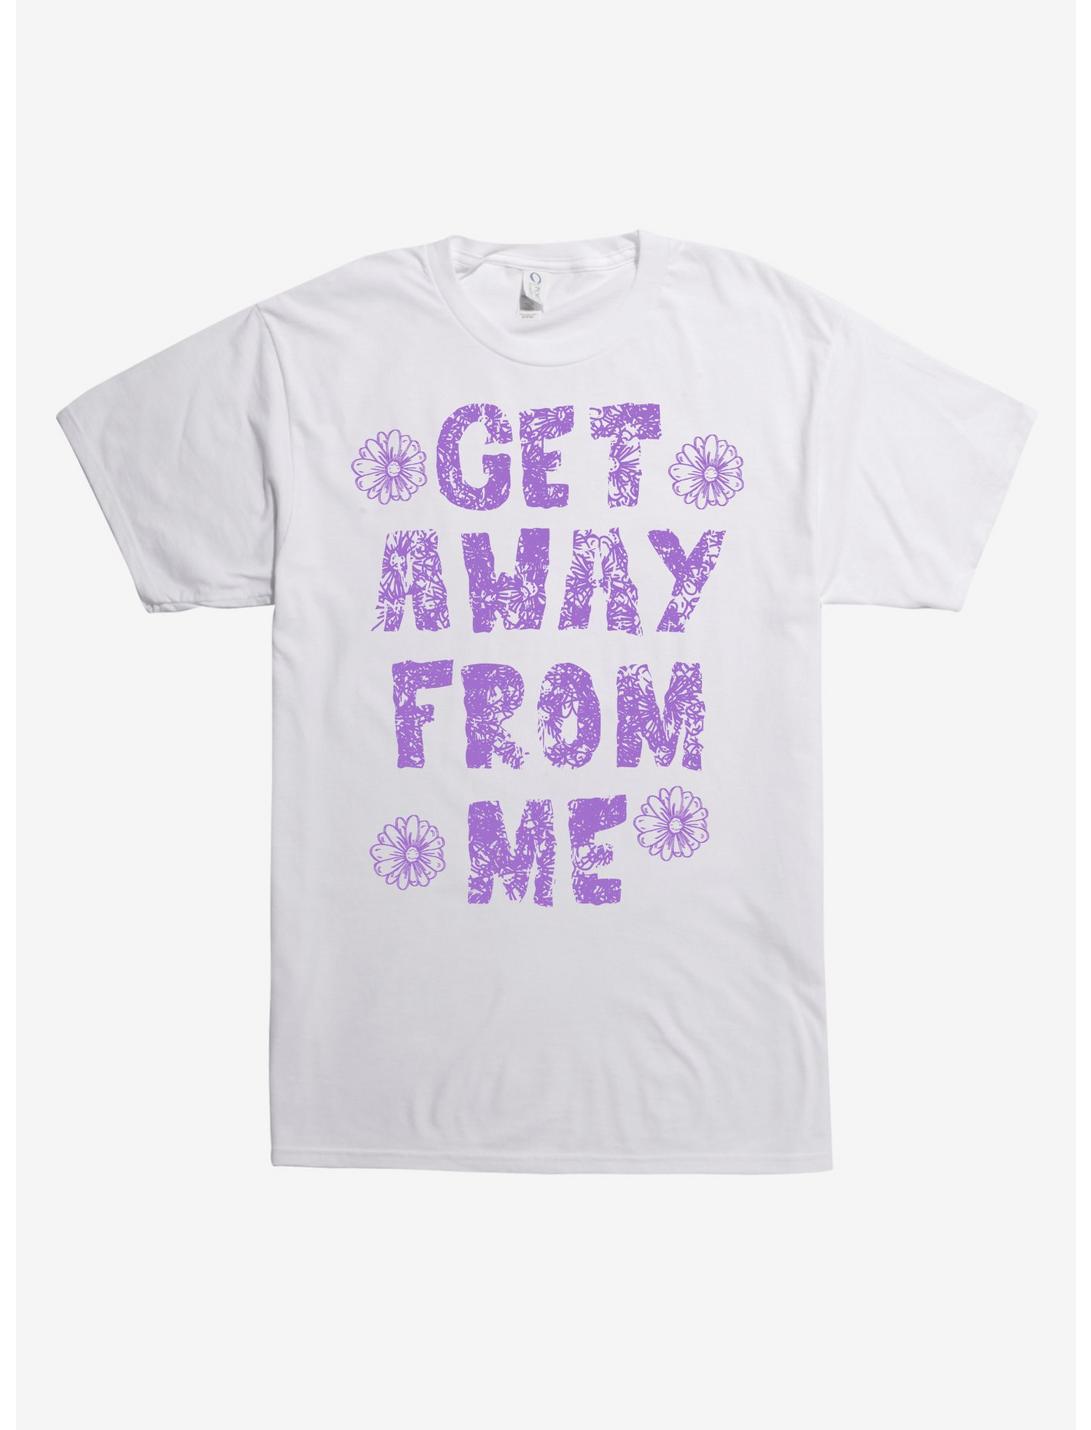 Get Away From Me Flower T-Shirt, WHITE, hi-res